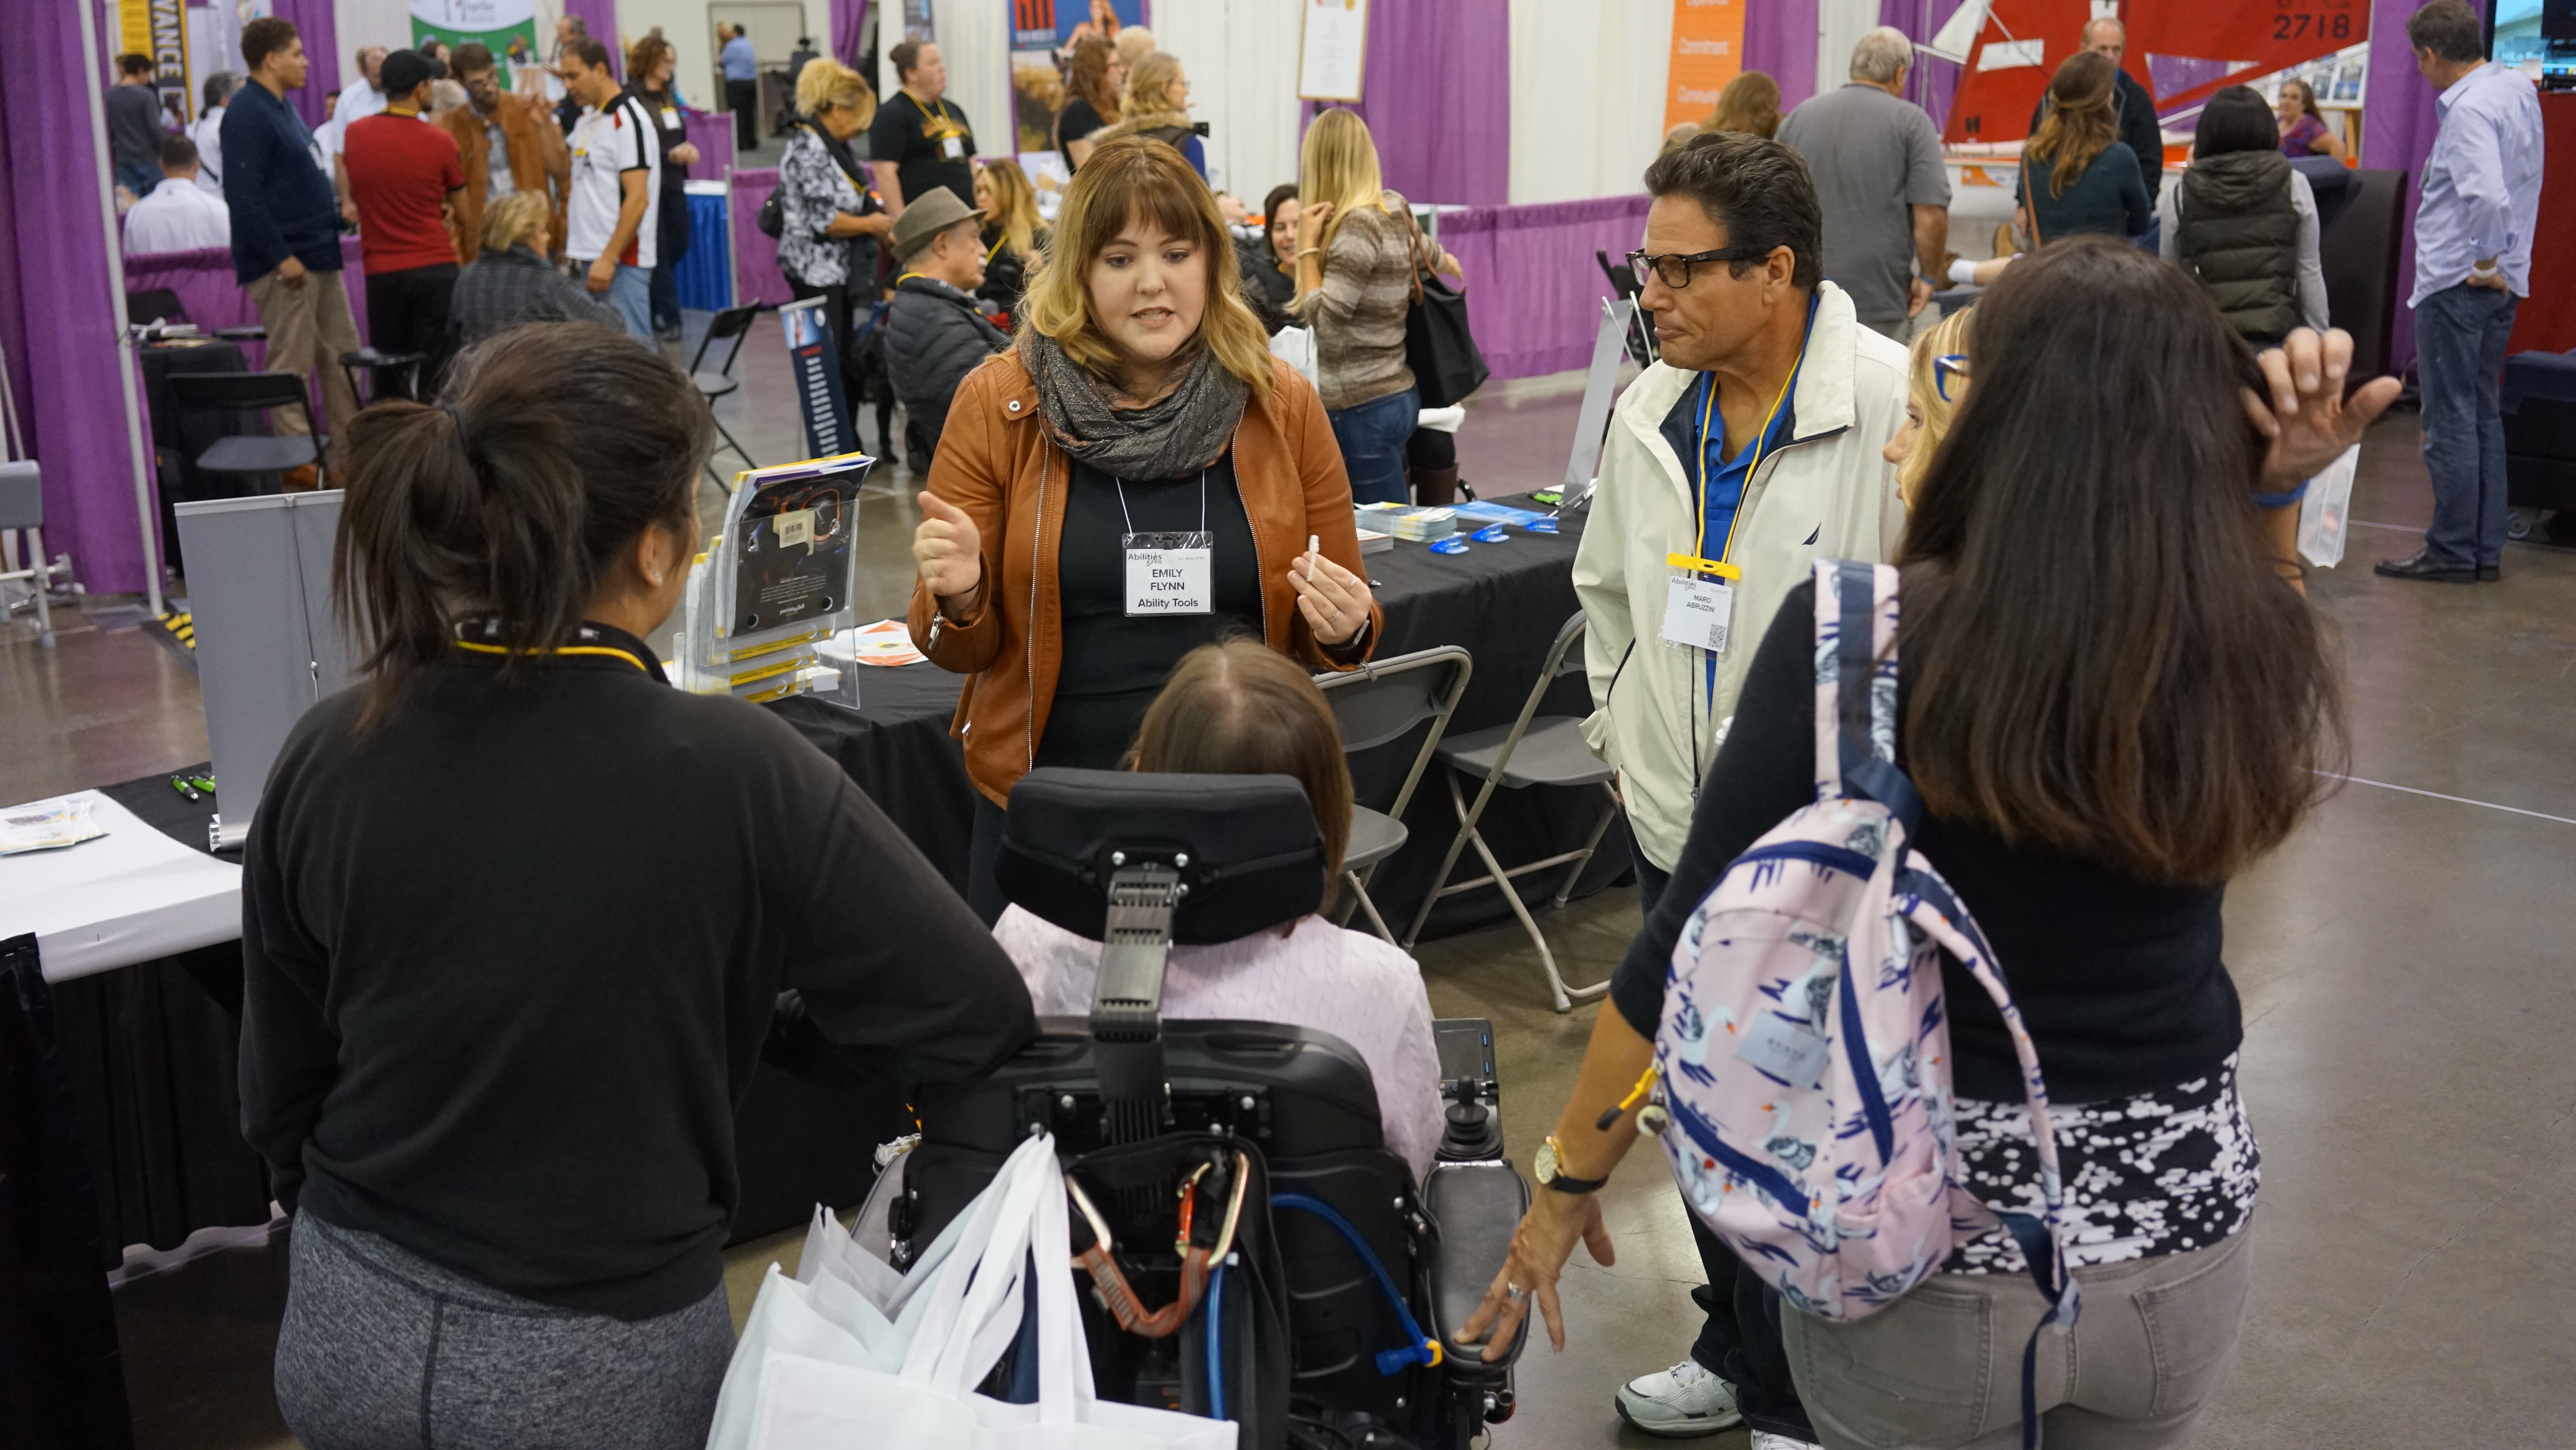 A woman is surrounded by 5 people at a disability resource fair. 